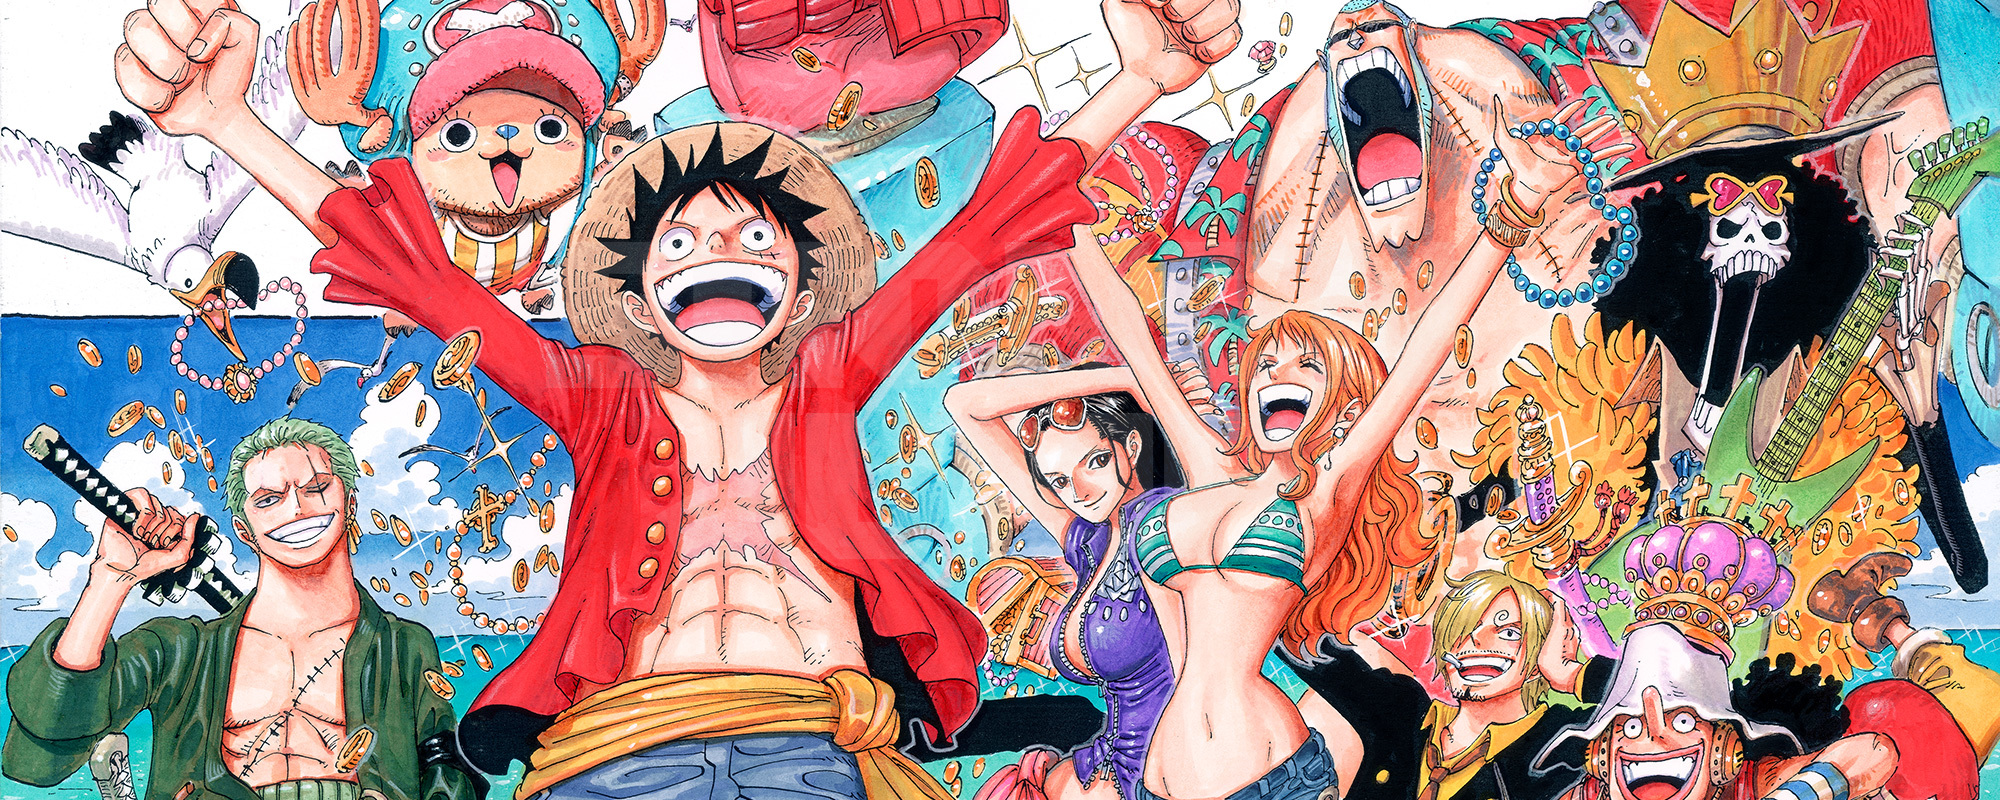 Is One Piece Film Red Canon? Explained